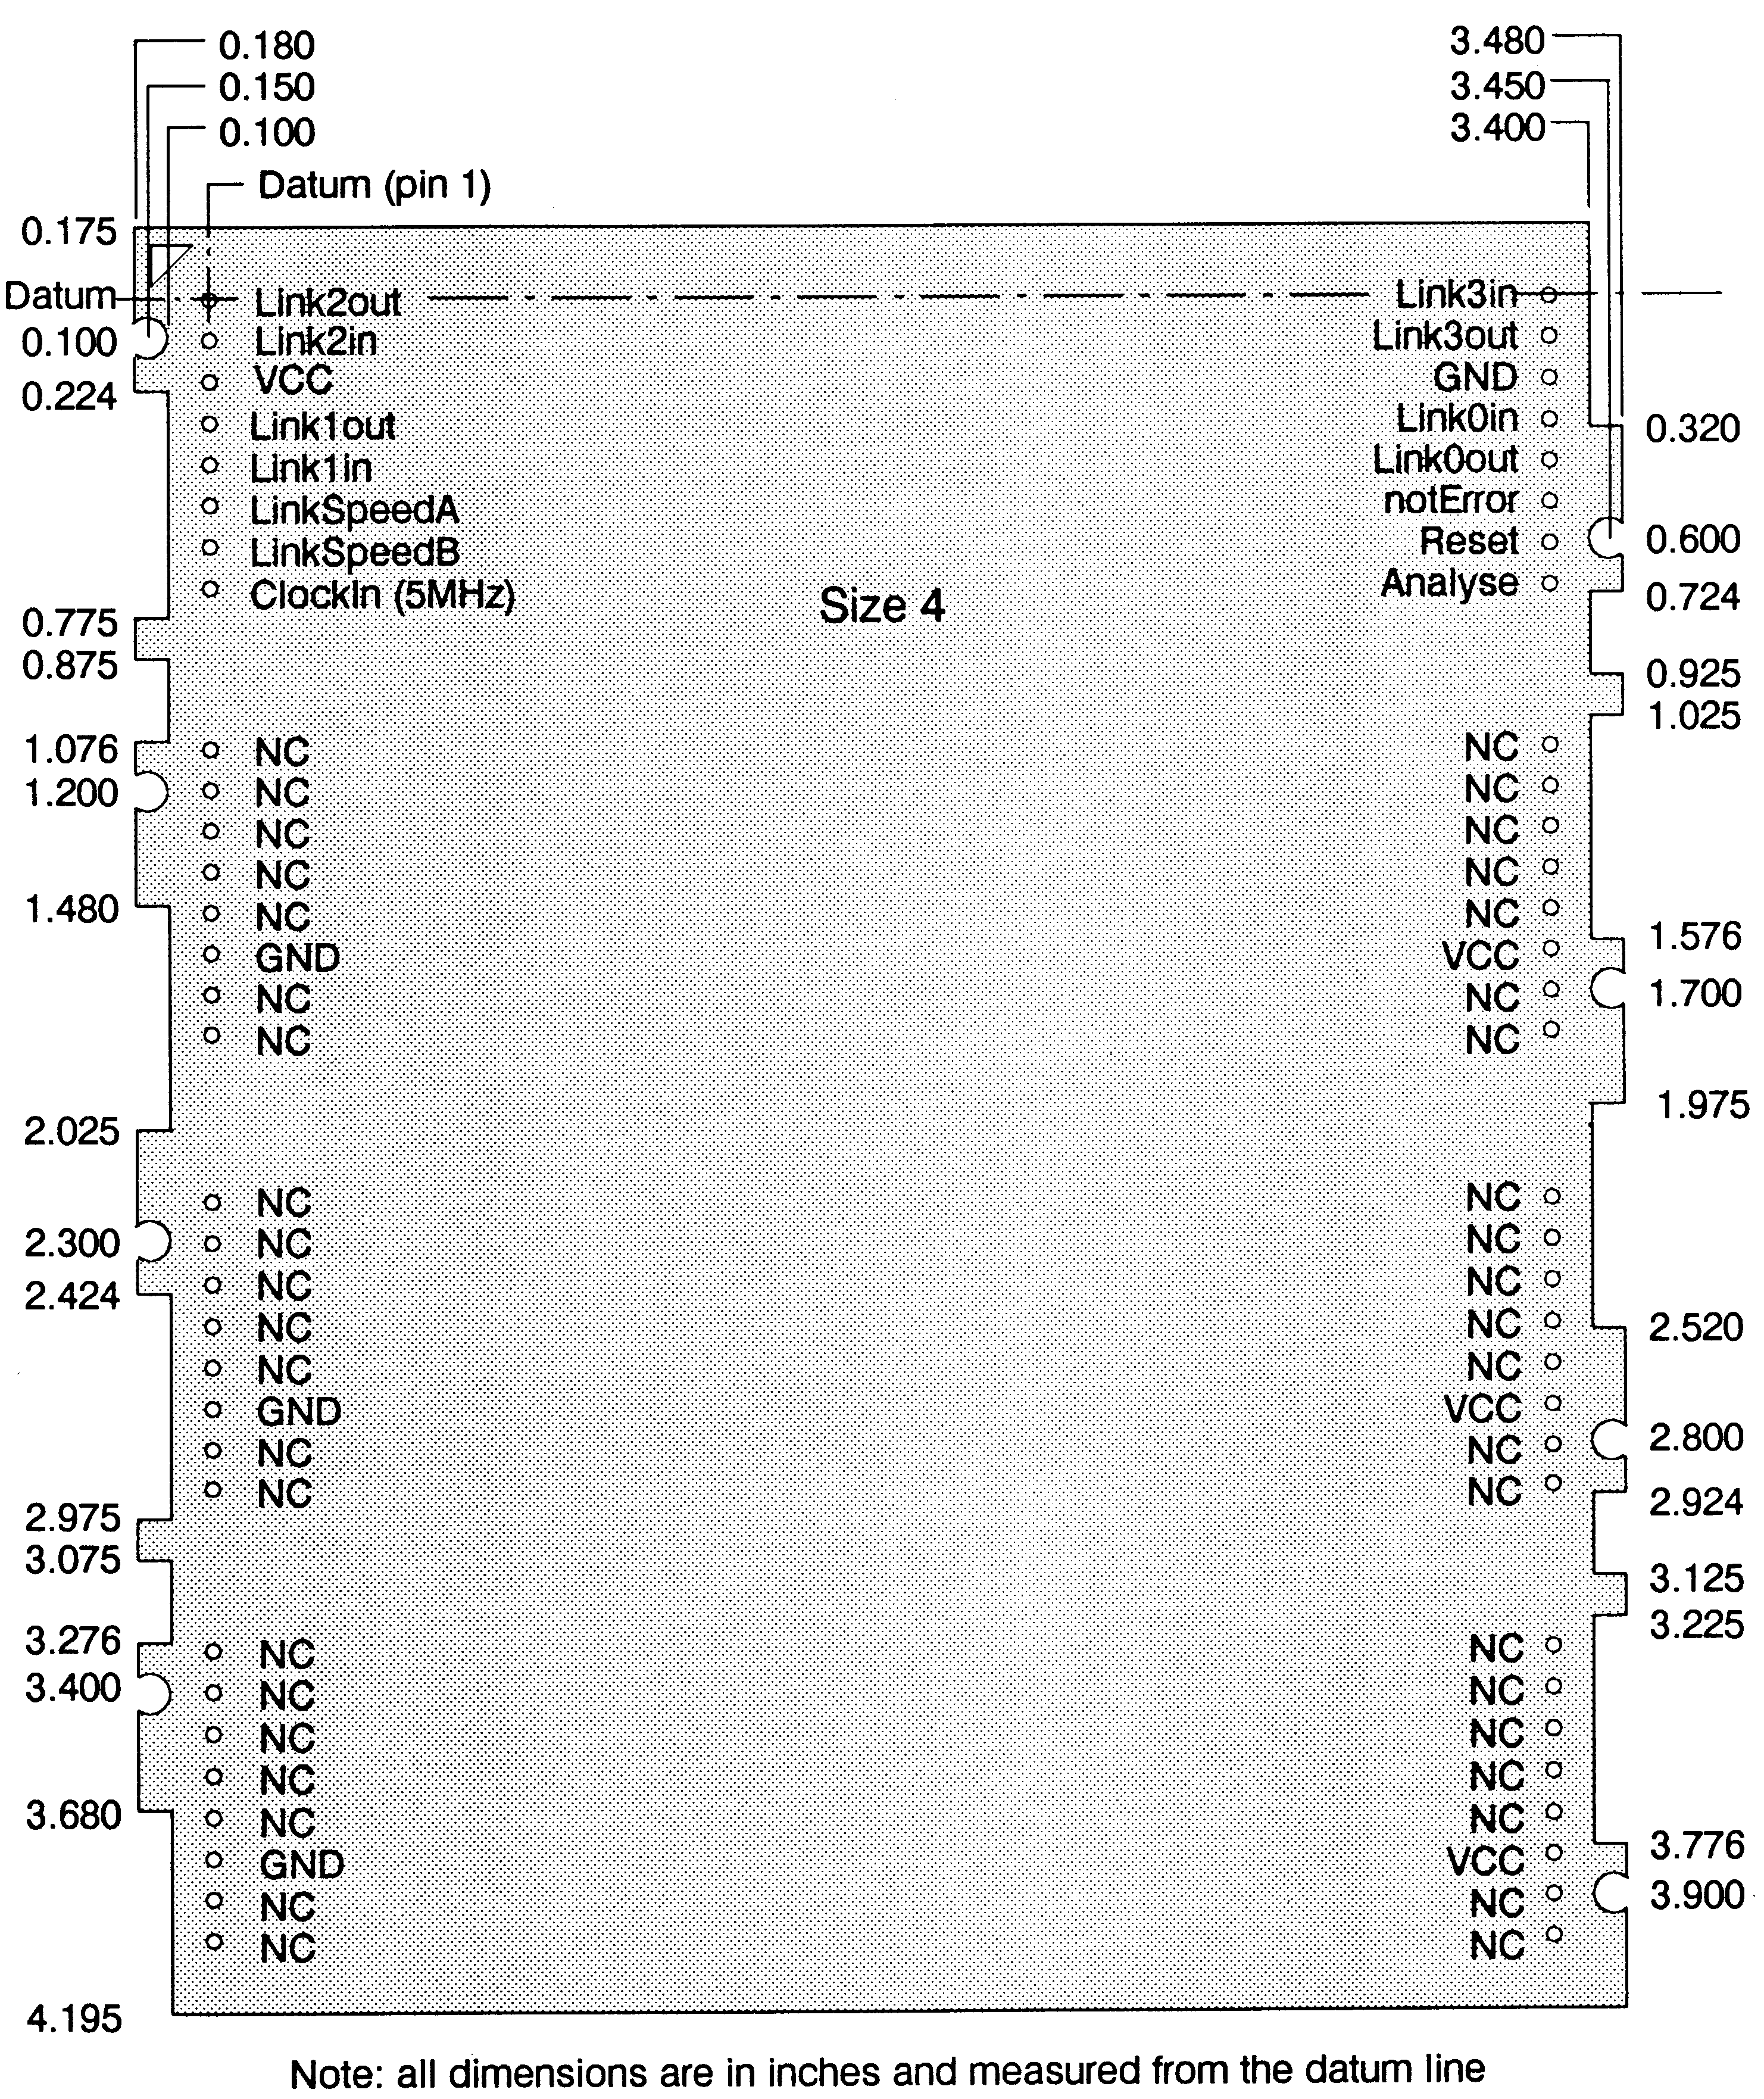 PCB profile drawings
and pinout, TRAMs Sizes 4